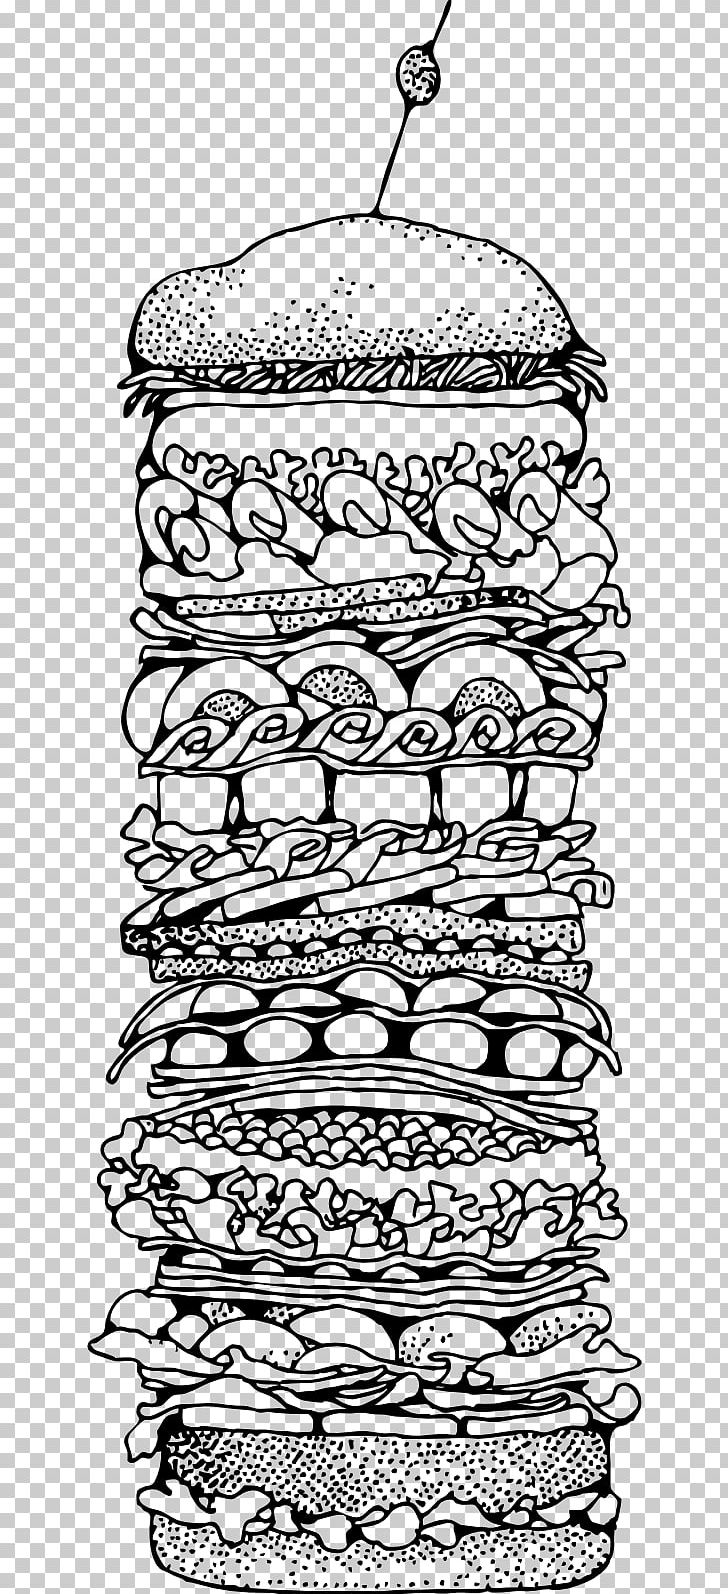 Hamburger Peanut Butter And Jelly Sandwich Submarine Sandwich PNG, Clipart, Area, Big, Black And White, Cheese, Compute Free PNG Download